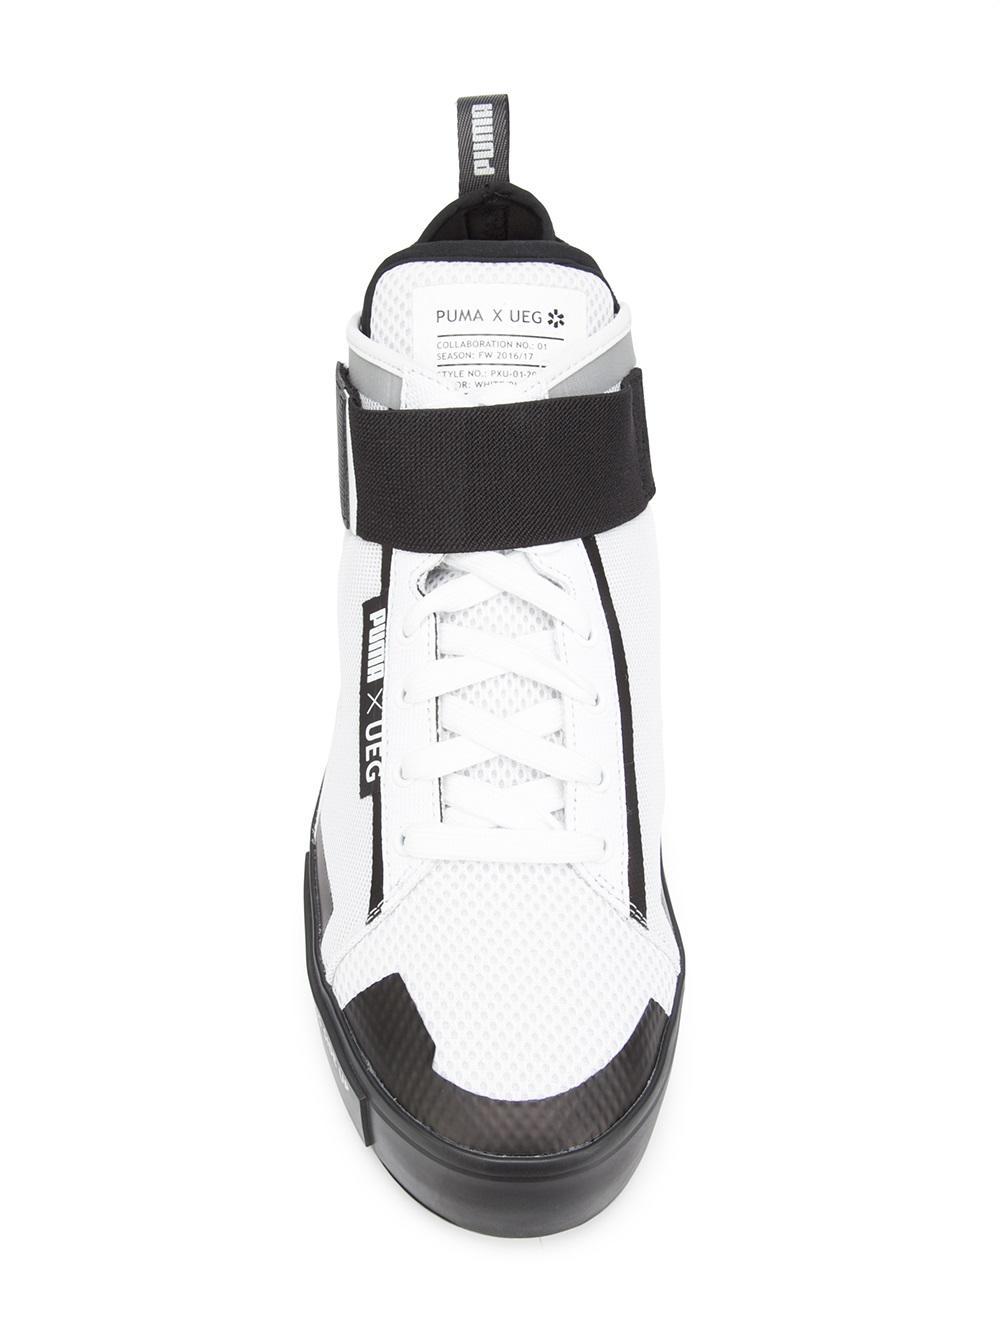 PUMA Rubber X Ueg Hi-top Sneakers in White for Men - Lyst